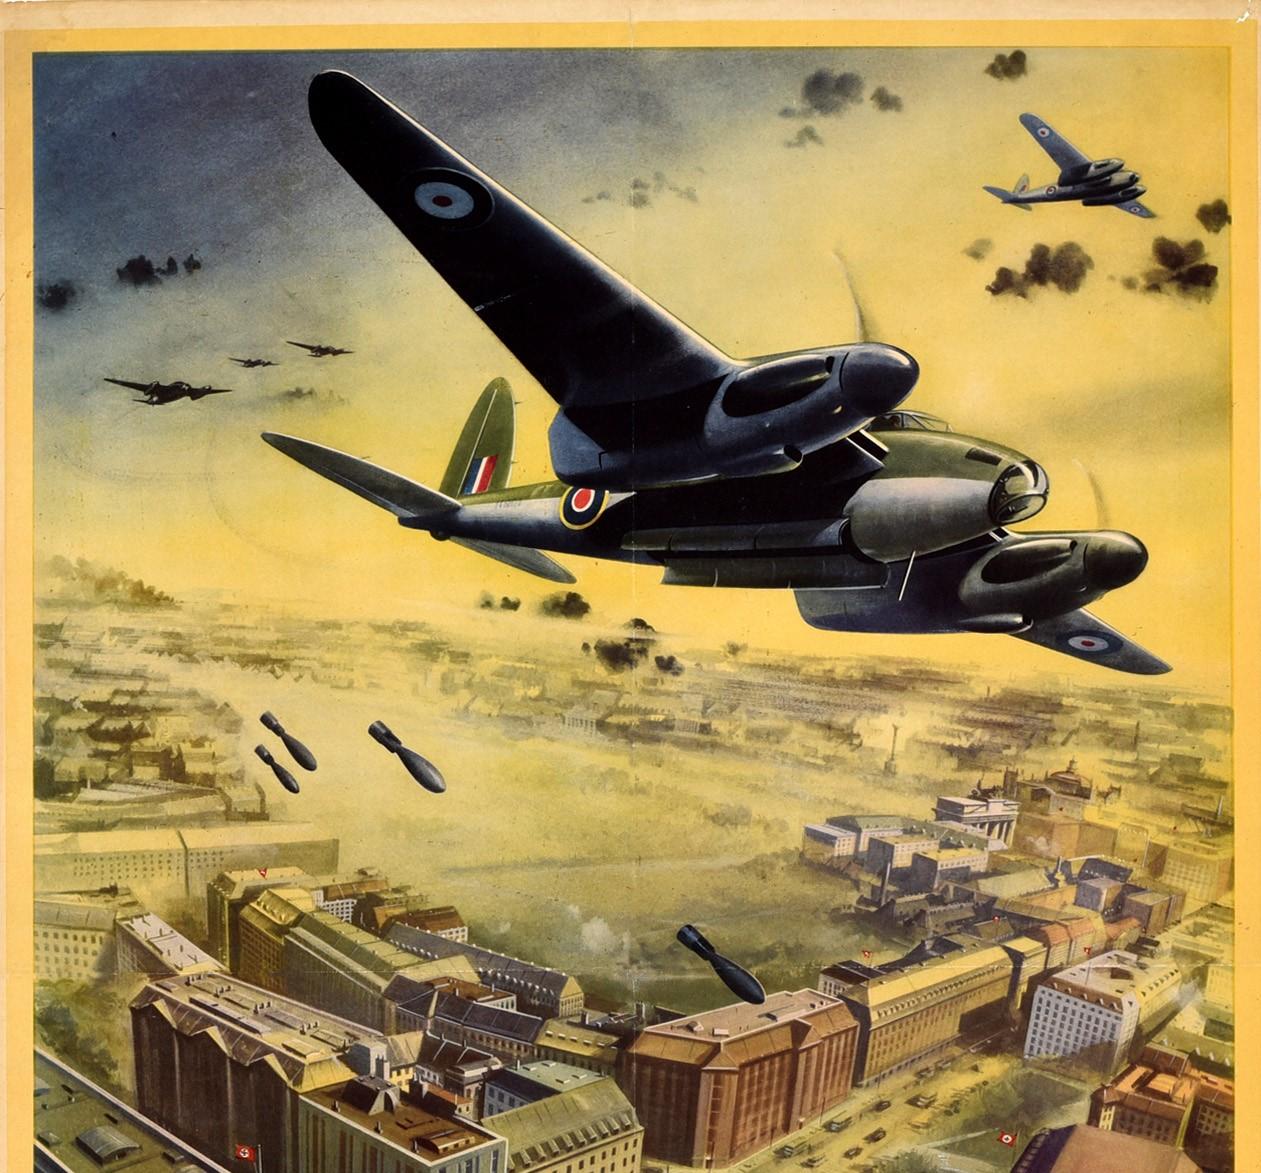 Original vintage World War Two propaganda poster - Into Action - featuring a great design entitled R.A.F. day raiders over Berlin’s official quarter with a dynamic image of British de Havilland Mosquito planes dropping bombs over the busy streets of